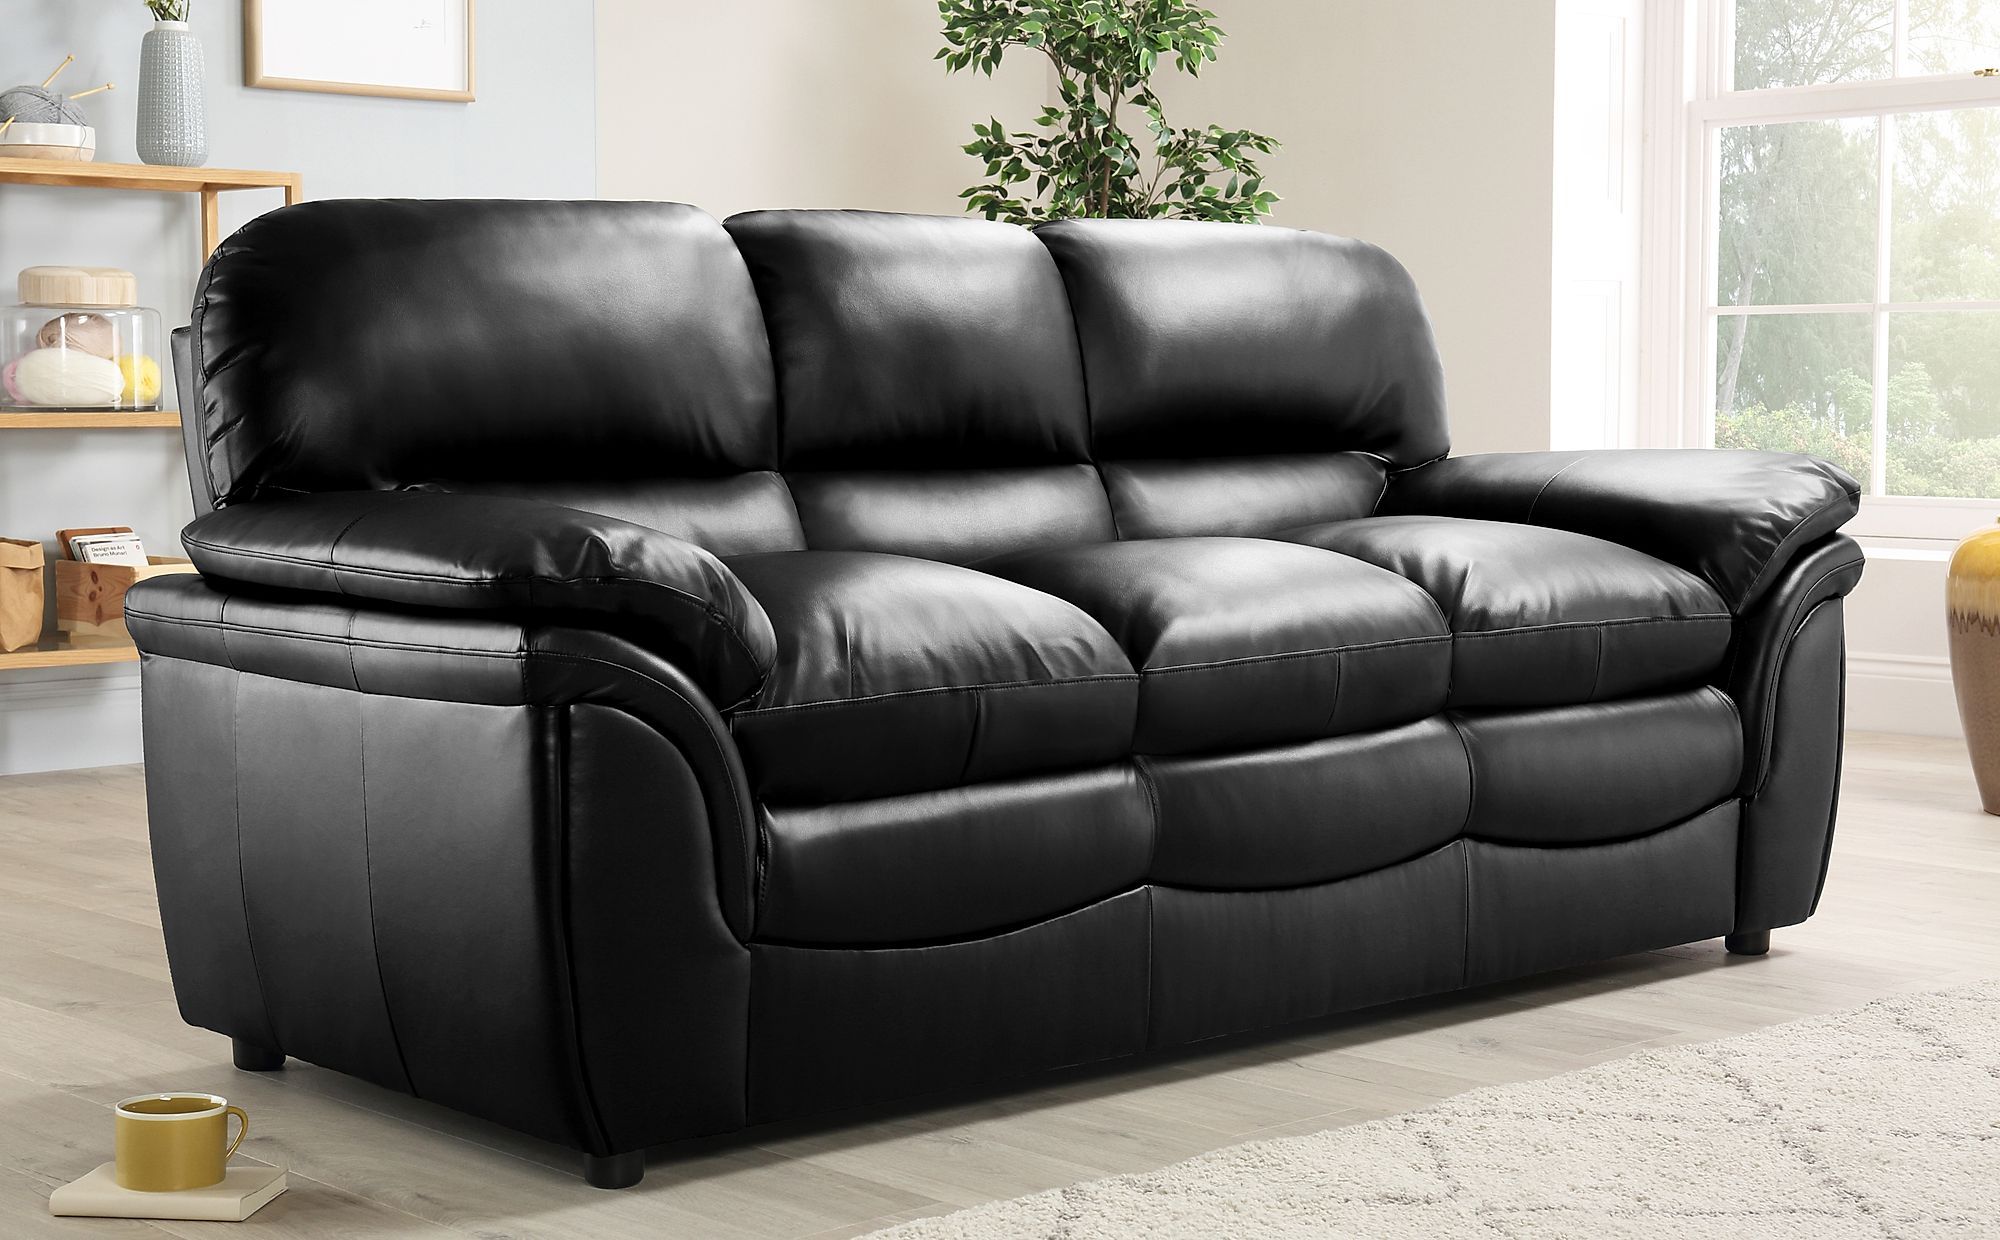 Rochester Black Leather 3 Seater Sofa | Furniture Choice Within Sofas In Black (View 6 of 20)